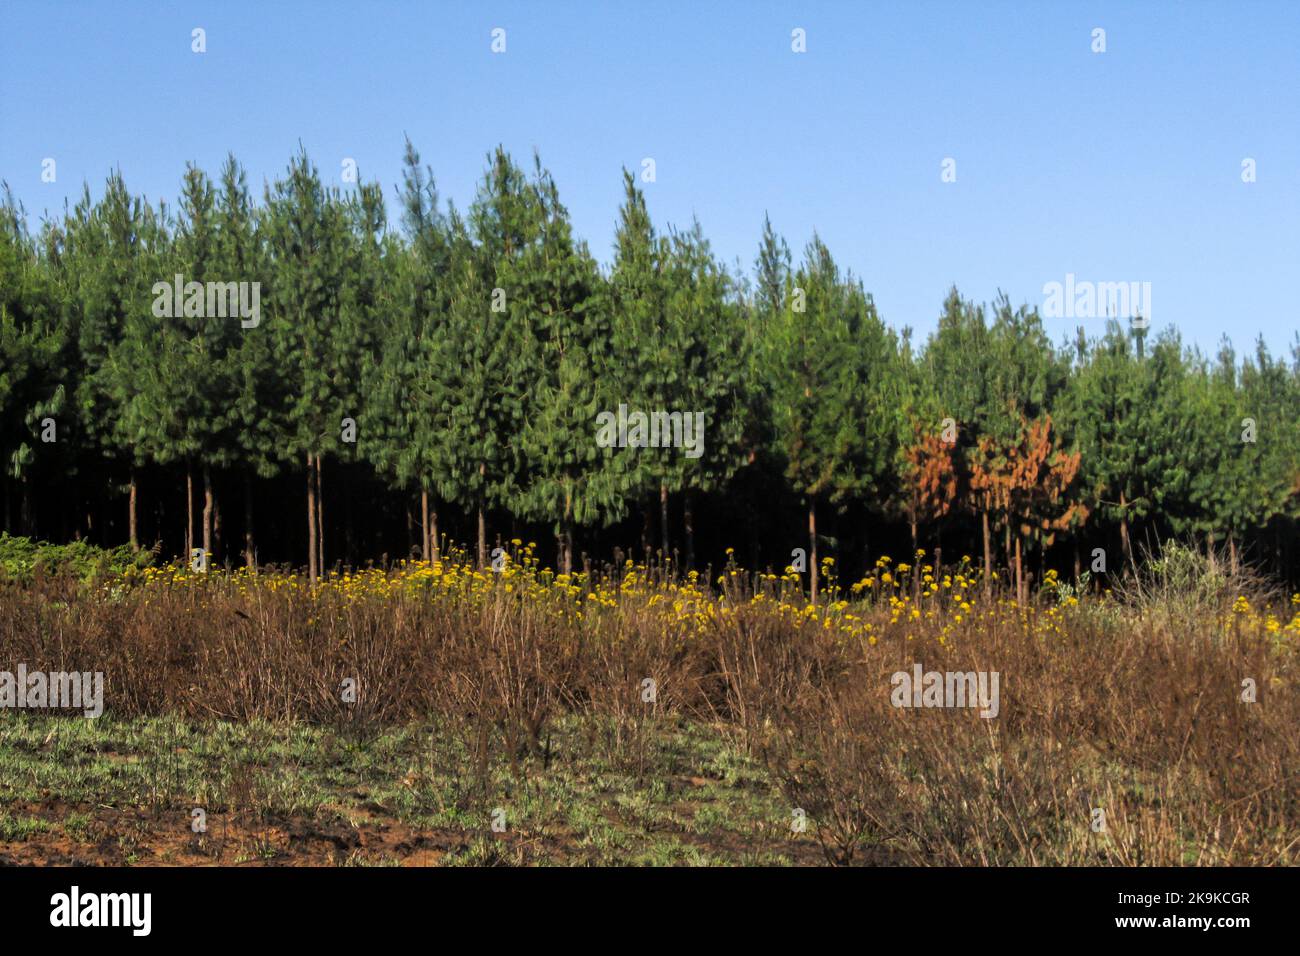 A relatively young plantation of Pine trees in the Kaapschehoop region, South Africa. Stock Photo